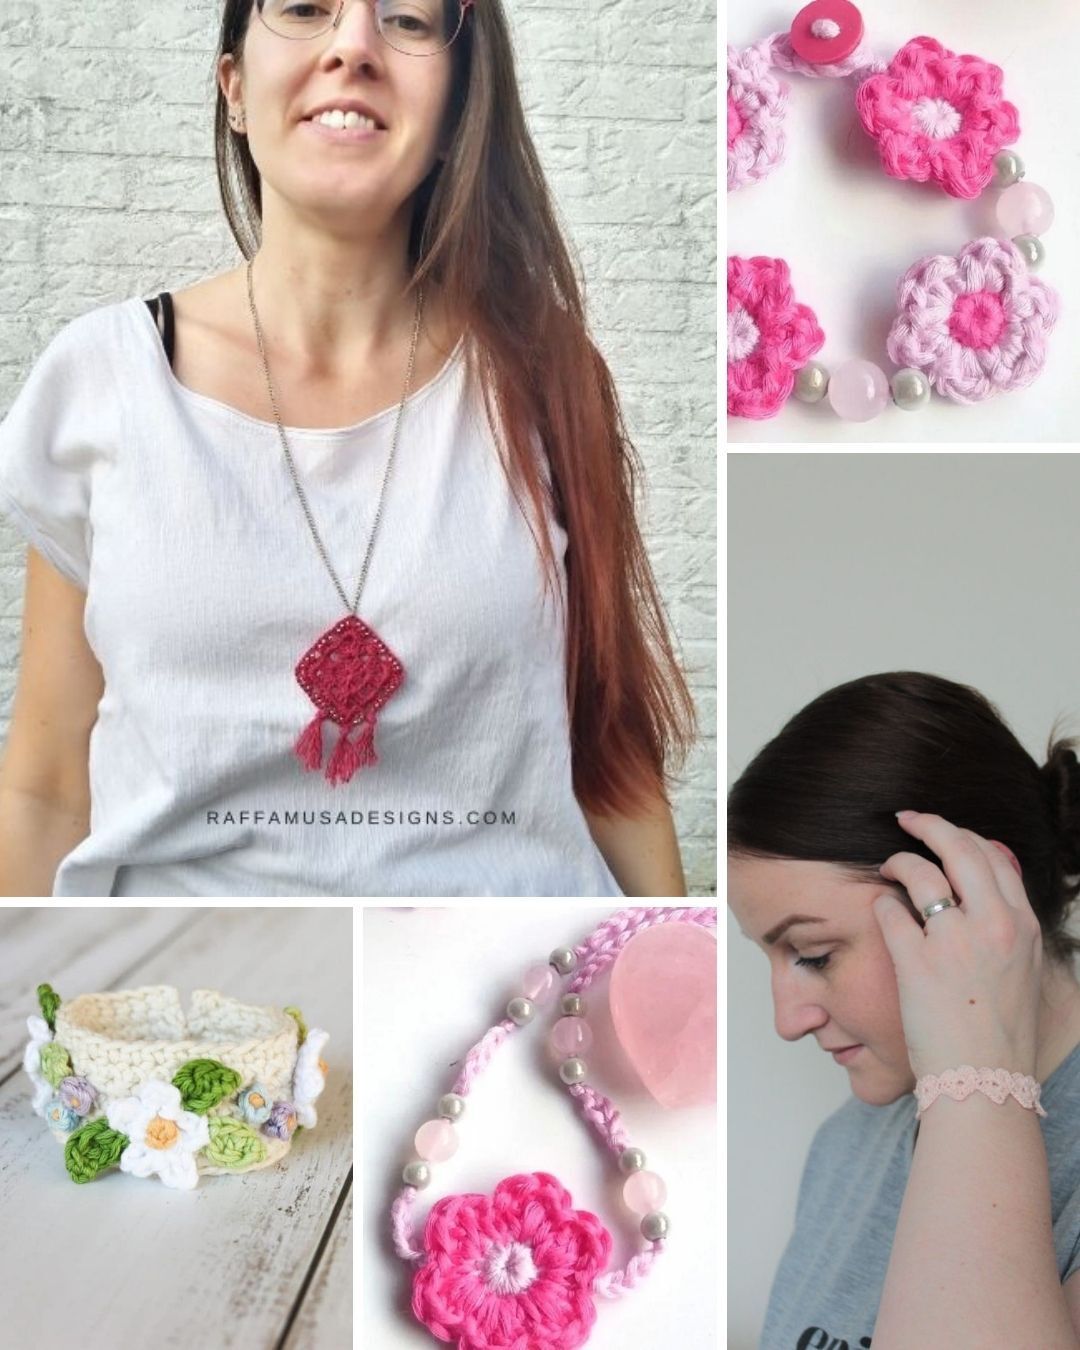 Crochet jewelry patterns for festival outfits